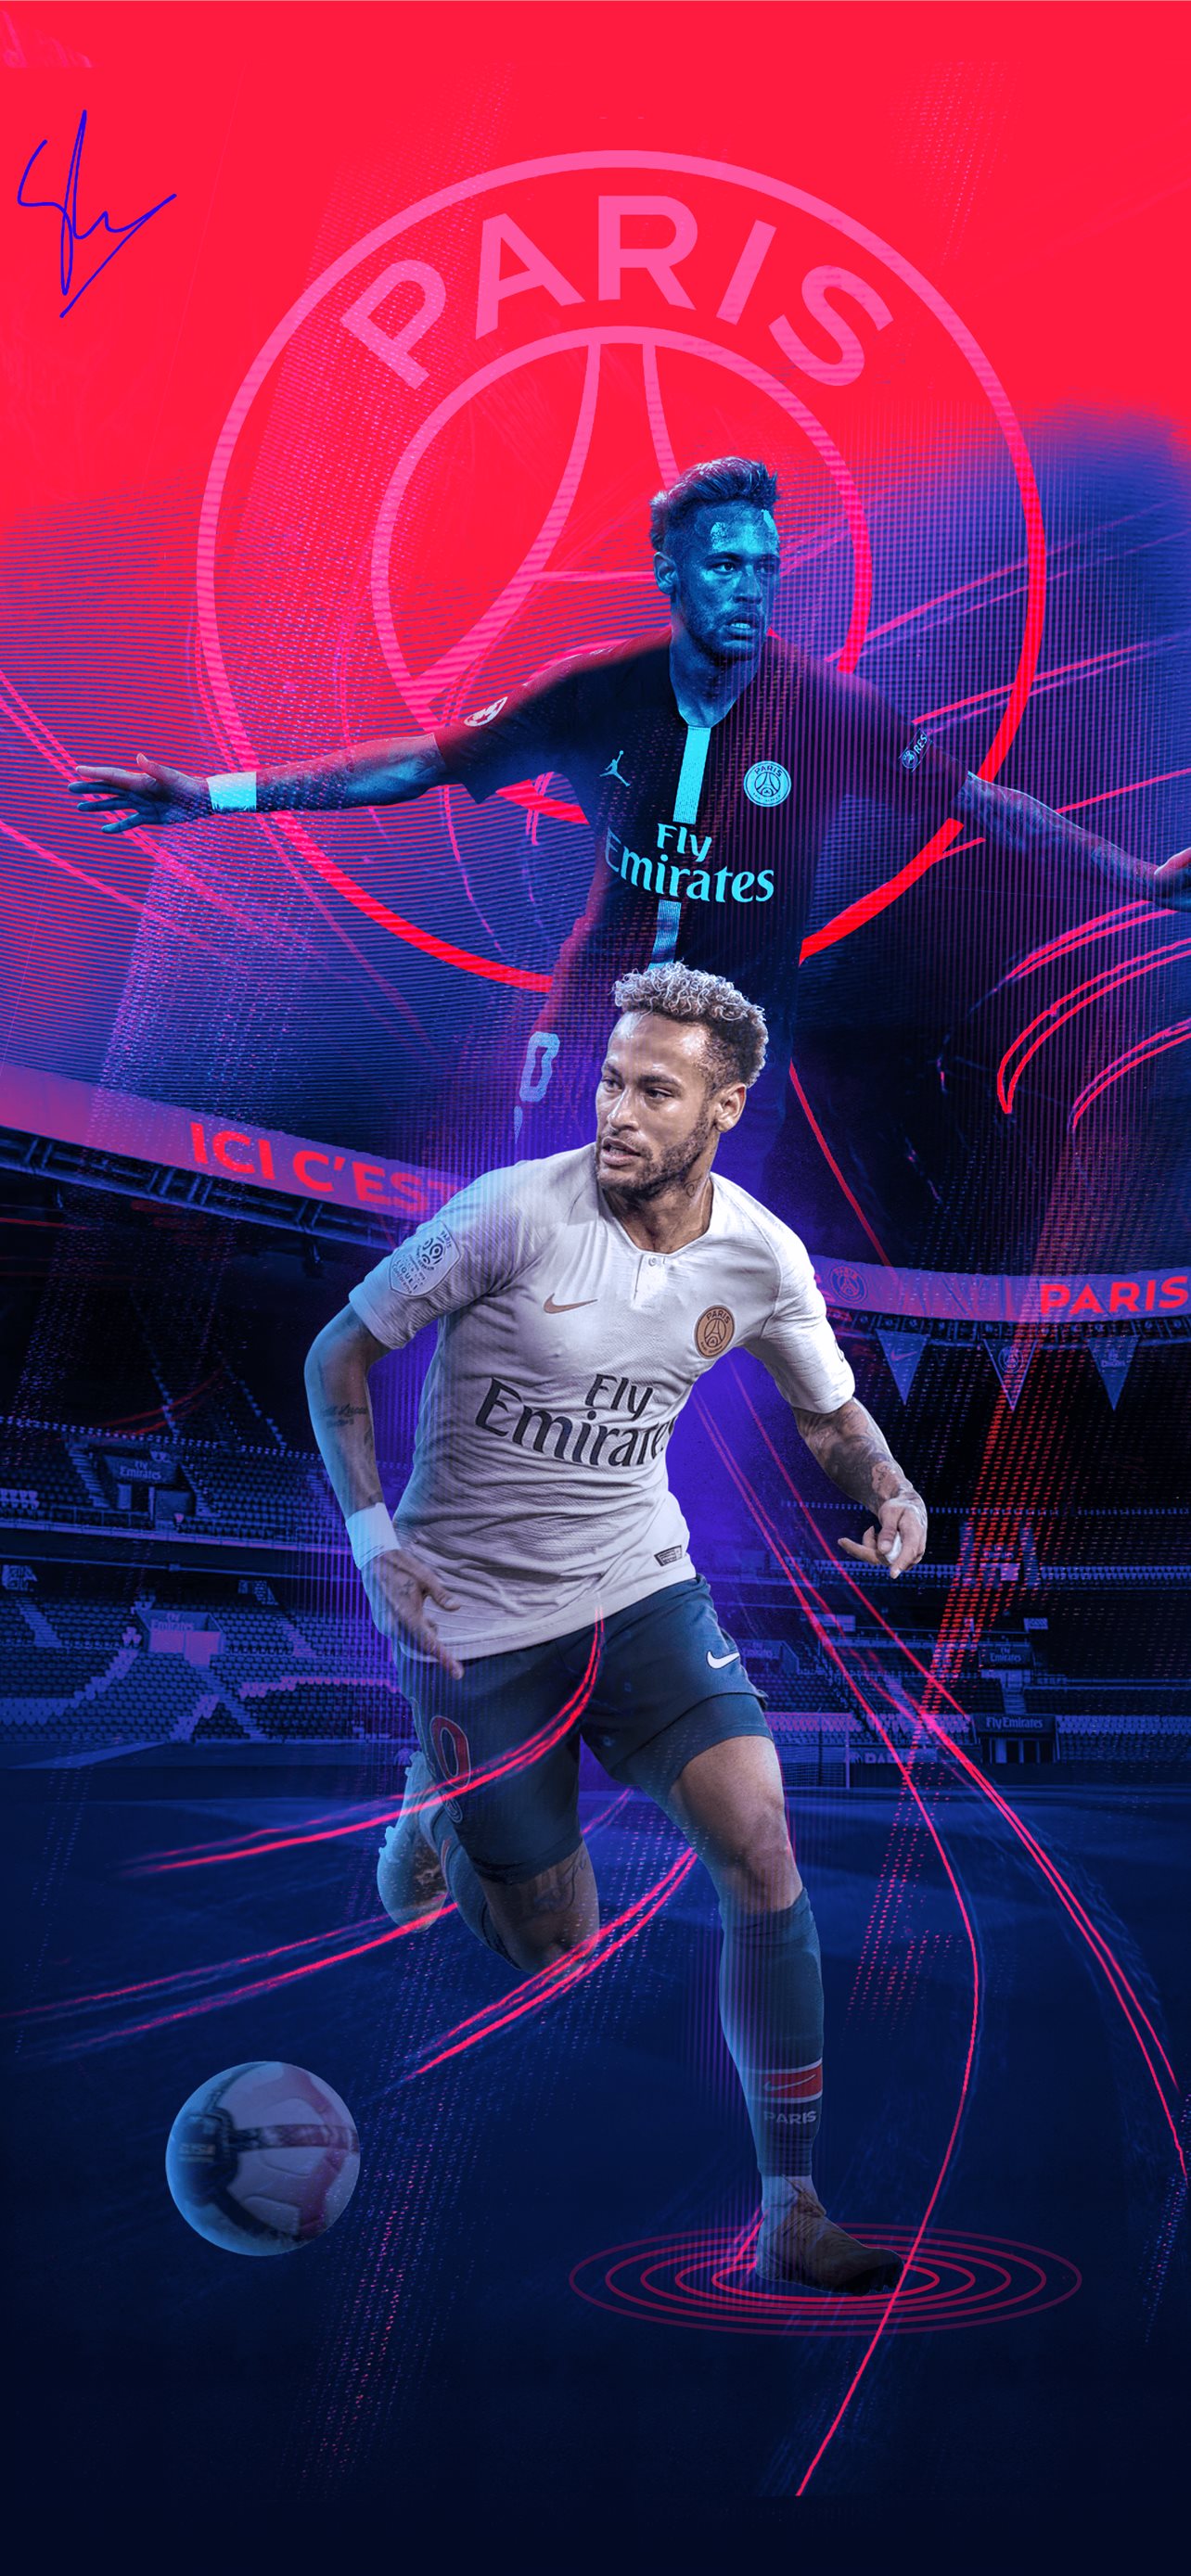 Neymar Football Art Painting 19Football poster canvas material wallpaper  mural suitable for office living room bedroom12x18inch30x45cm   Amazoncouk DIY  Tools